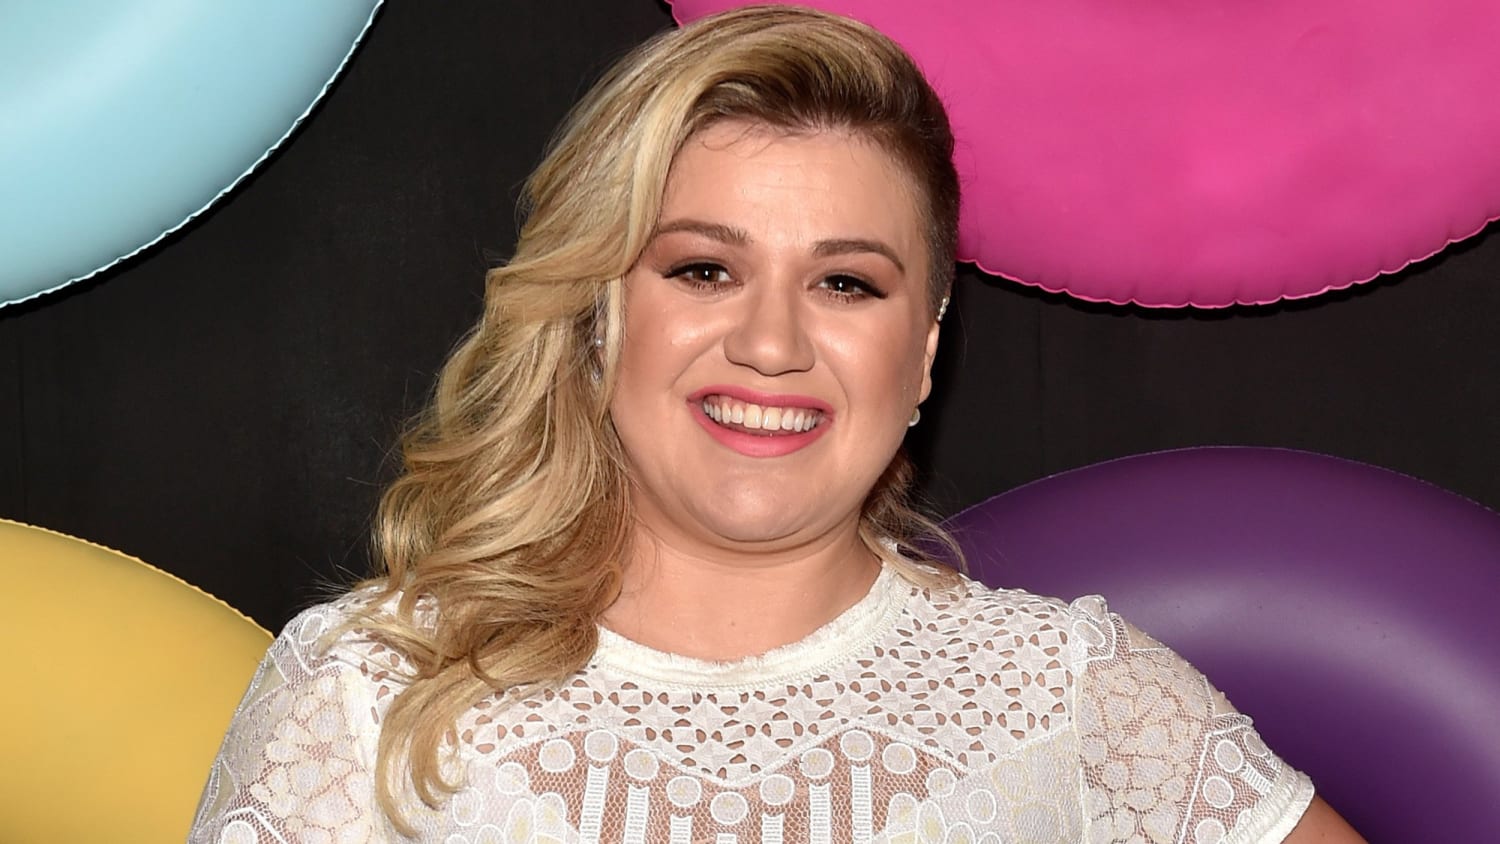 Kelly Clarkson's son Remy is all smiles after a shot in adorable new photo - TODAY.com2500 x 1407